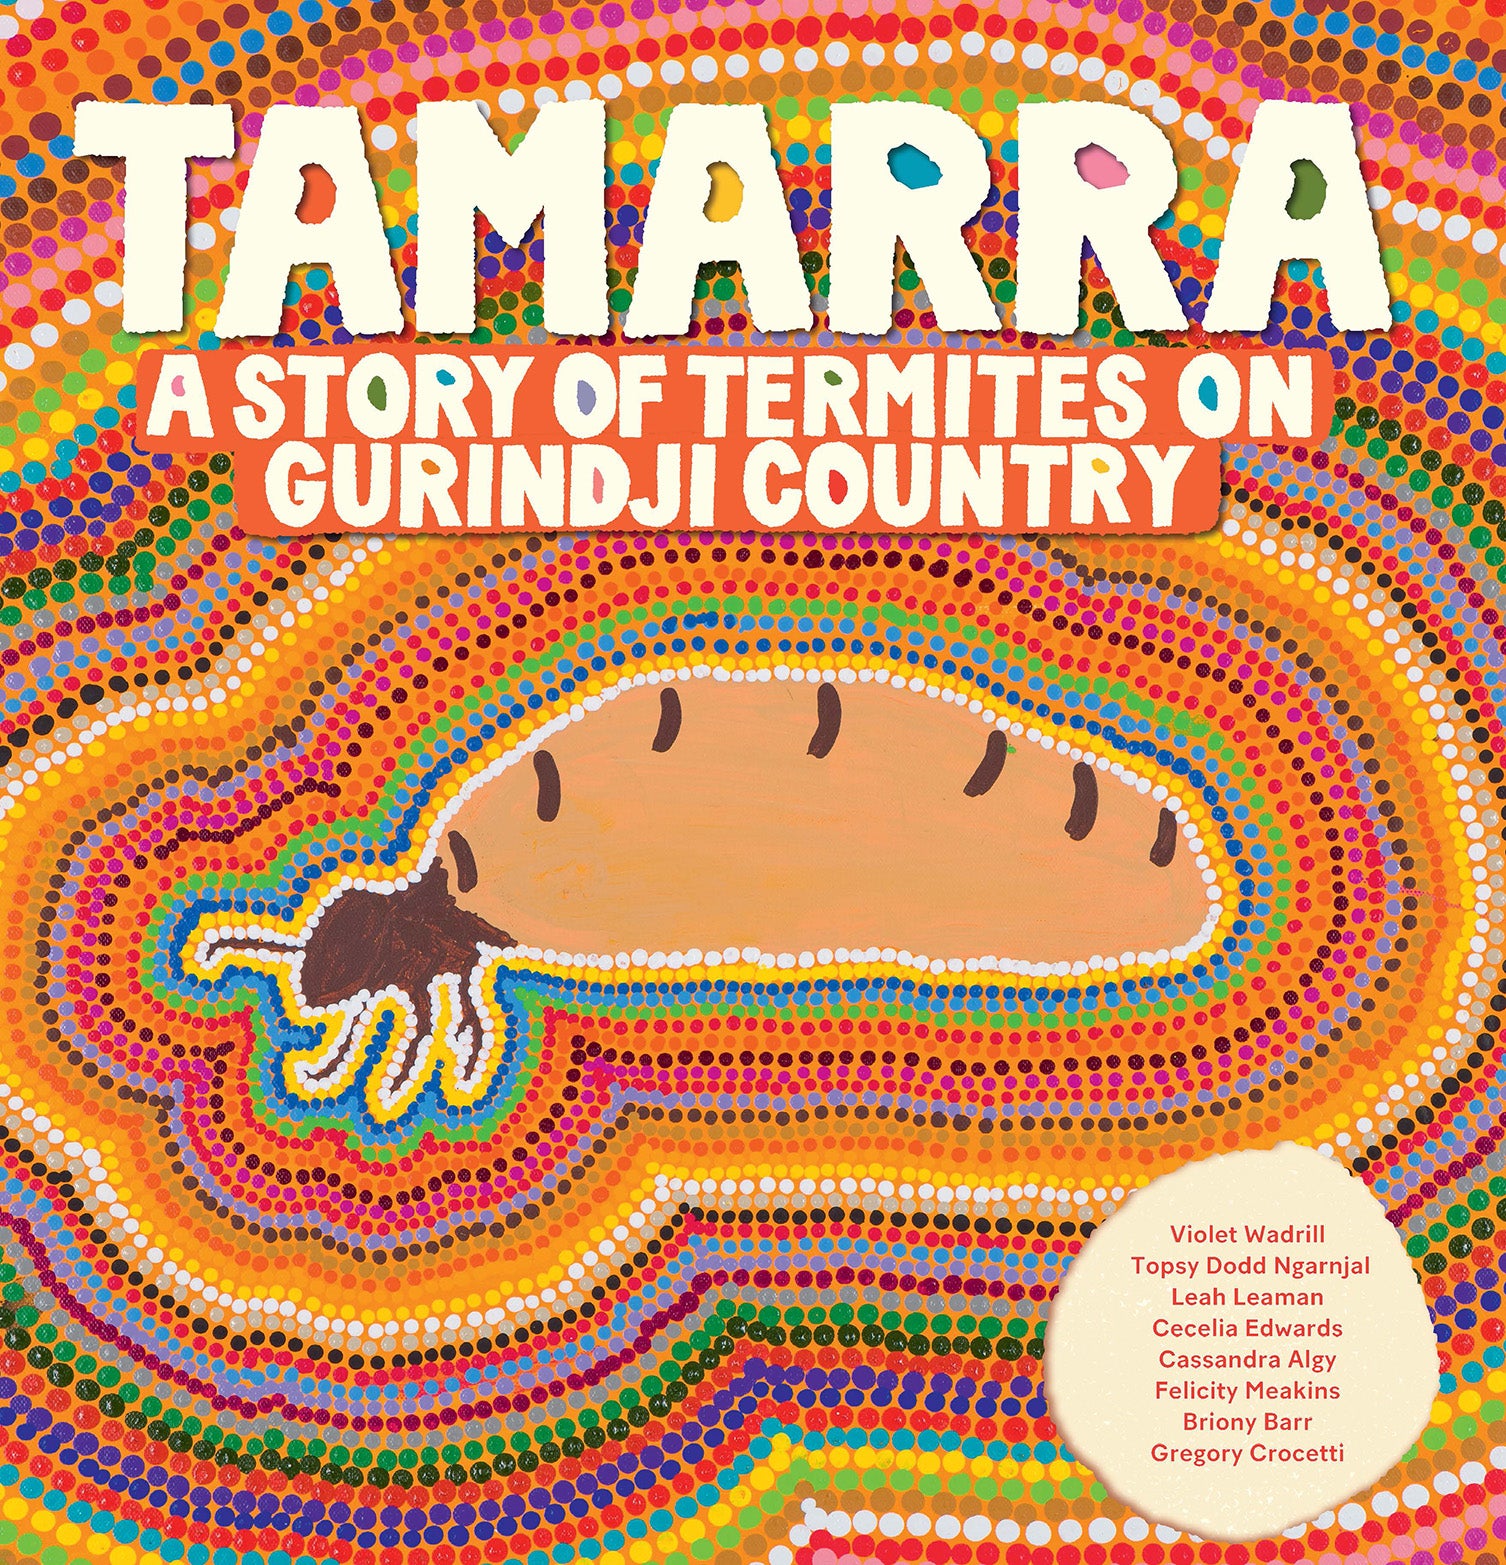 Tamarra: A Story of Termites on Gurindji Country by Violet Wadrill